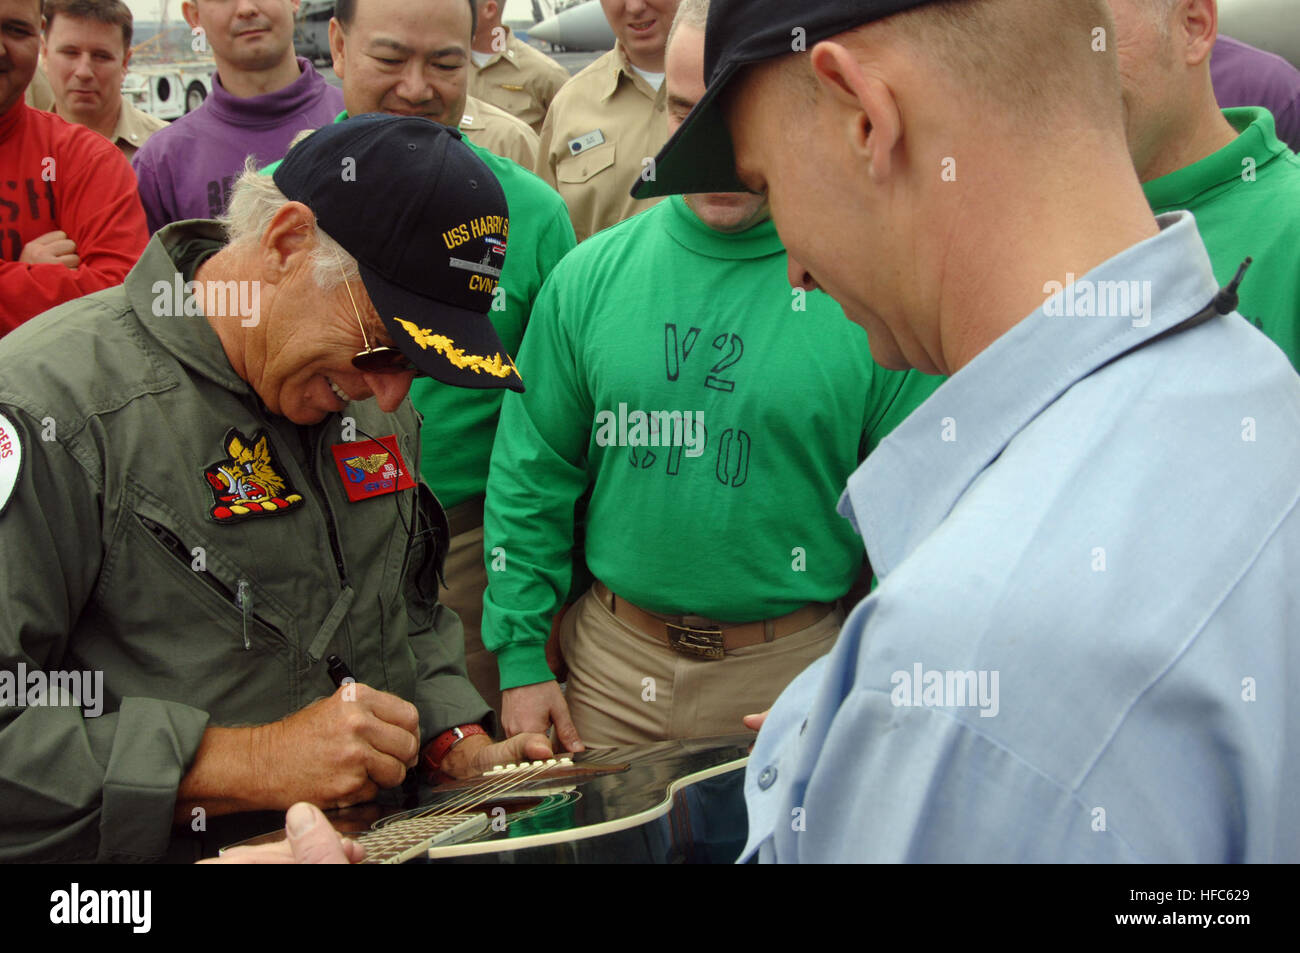 080128-N-8923M-035 MIDDLE EASTERN PORT (Jan. 28, 2008) Recording artist Jimmy Buffett autographs a Sailor’s guitar on the flight deck of the aircraft carrier USS Harry S. Truman (CVN 75) during a recent port visit in the Middle East. Truman and embarked Carrier Air Wing (CVW) 3 are on deployment in support of Operations Iraqi Freedom, Enduring Freedom and maritime security operations. U.S. Navy photo by Mass Communication Specialist Seaman Kevin T. Murray (Released) Jimmy Buffett autographs a Sailor's guitar 89459 Stock Photo